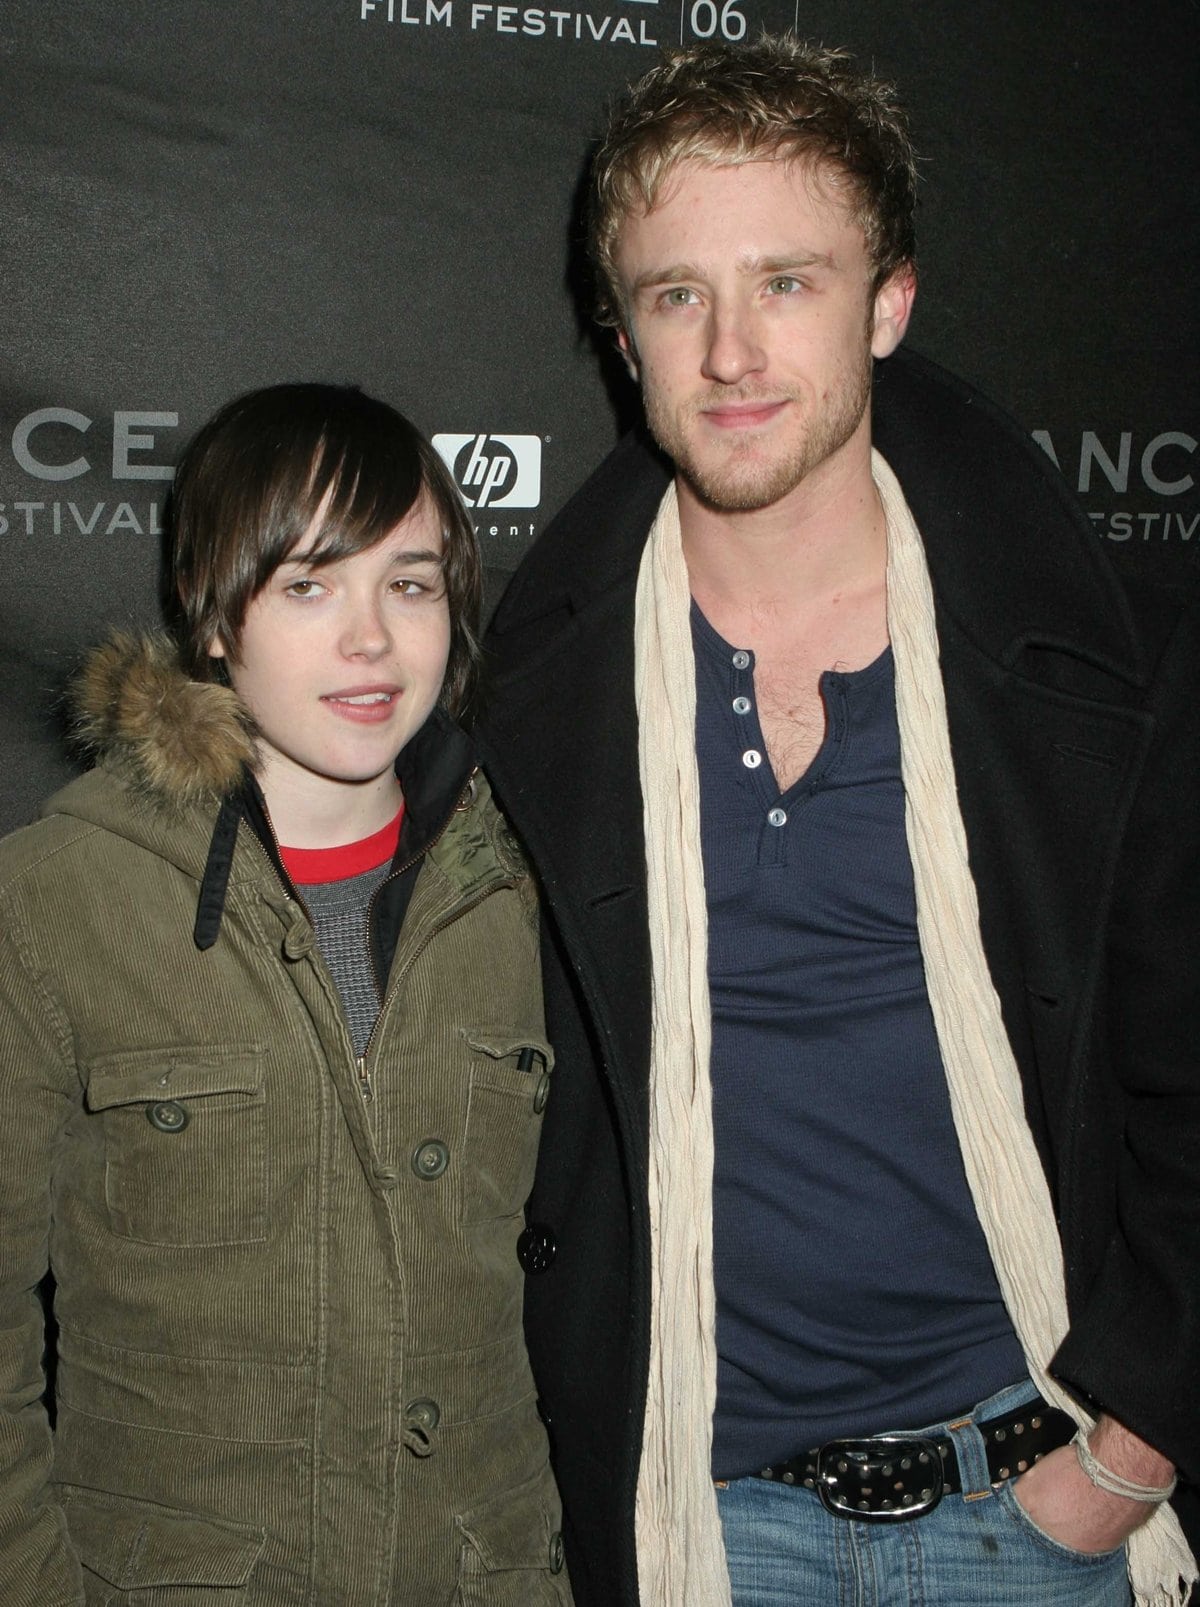 X-Men: The Last Stand co-stars Elliot (Ellen) Page and Ben Foster are believed to have dated from 2006 to 2007